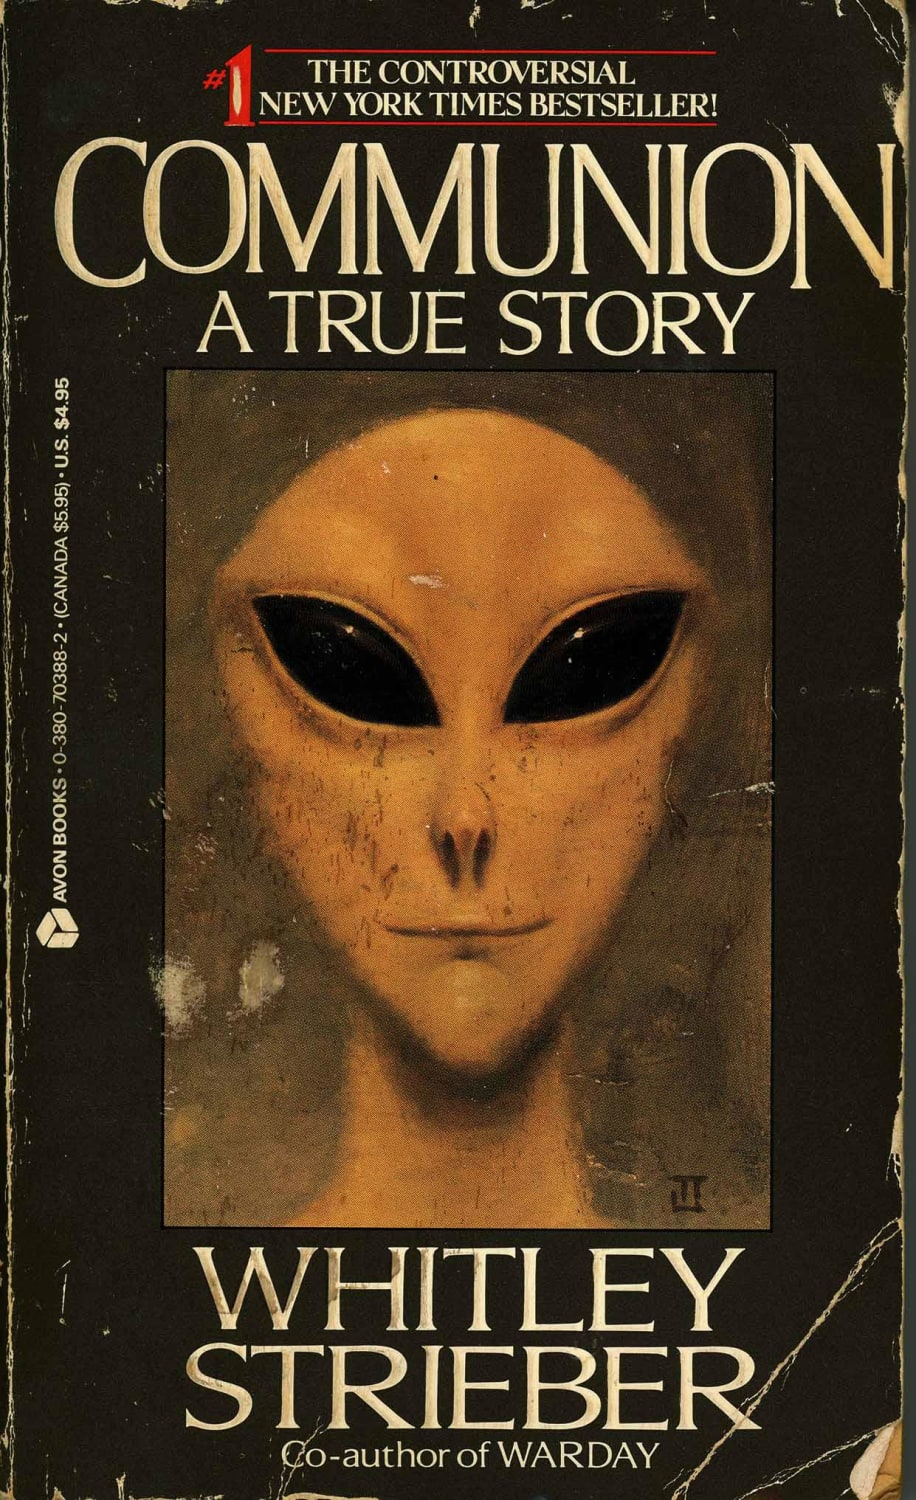 A classic. I read this In the early 2000s in middle school. The movie is very underrated. The incredibly bizarre & bewildering events fascinated me. I became obsessed with Highstrangeness that day, not the paranormal or supernatural, but the utterly bizarre and strange